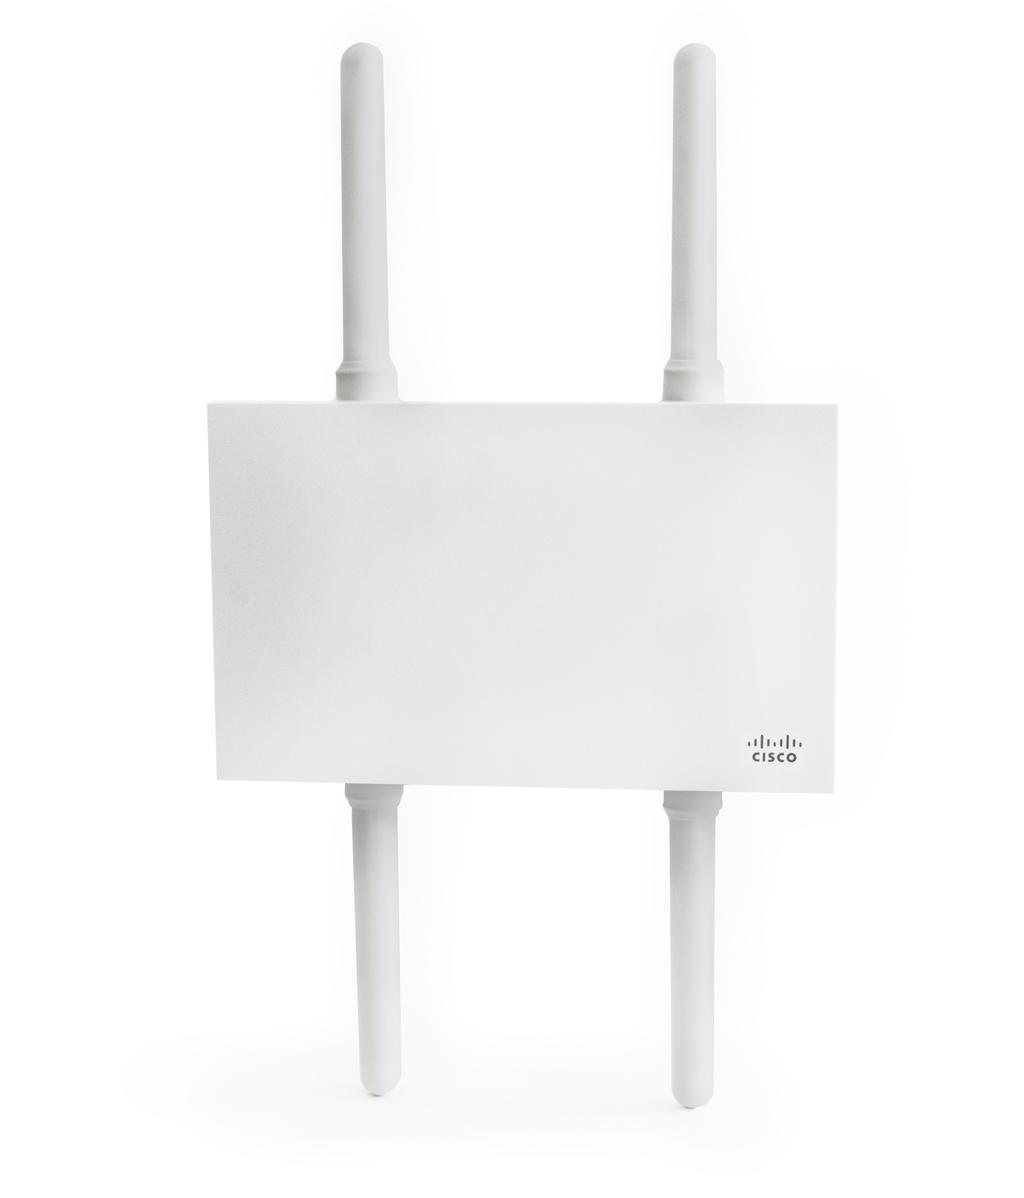 Datasheet MR84 MR84 Dual-band 802.11ac Wave 2 access point with separate radios dedicated to security, RF management, and Bluetooth High performance 802.